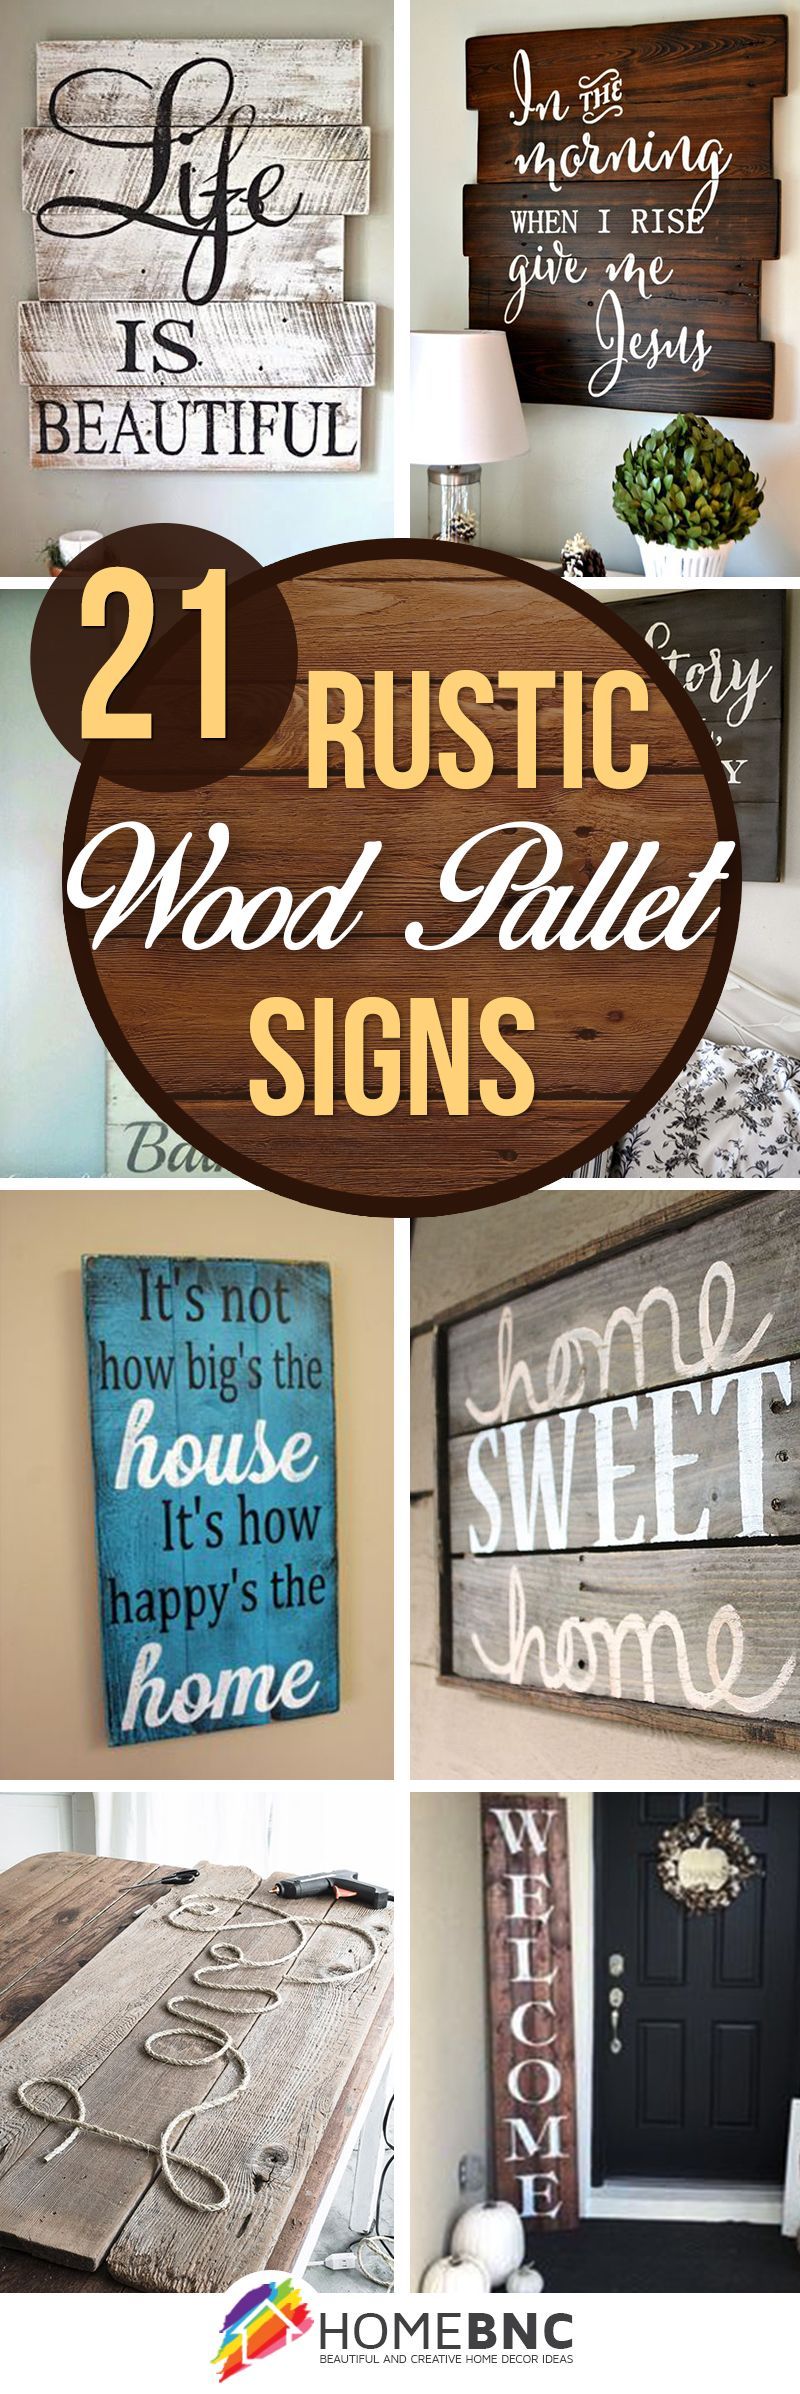 Wood signs are a hot new decorating trend and it’s easy to see why they’ve become so popular. Find the best ideas and start